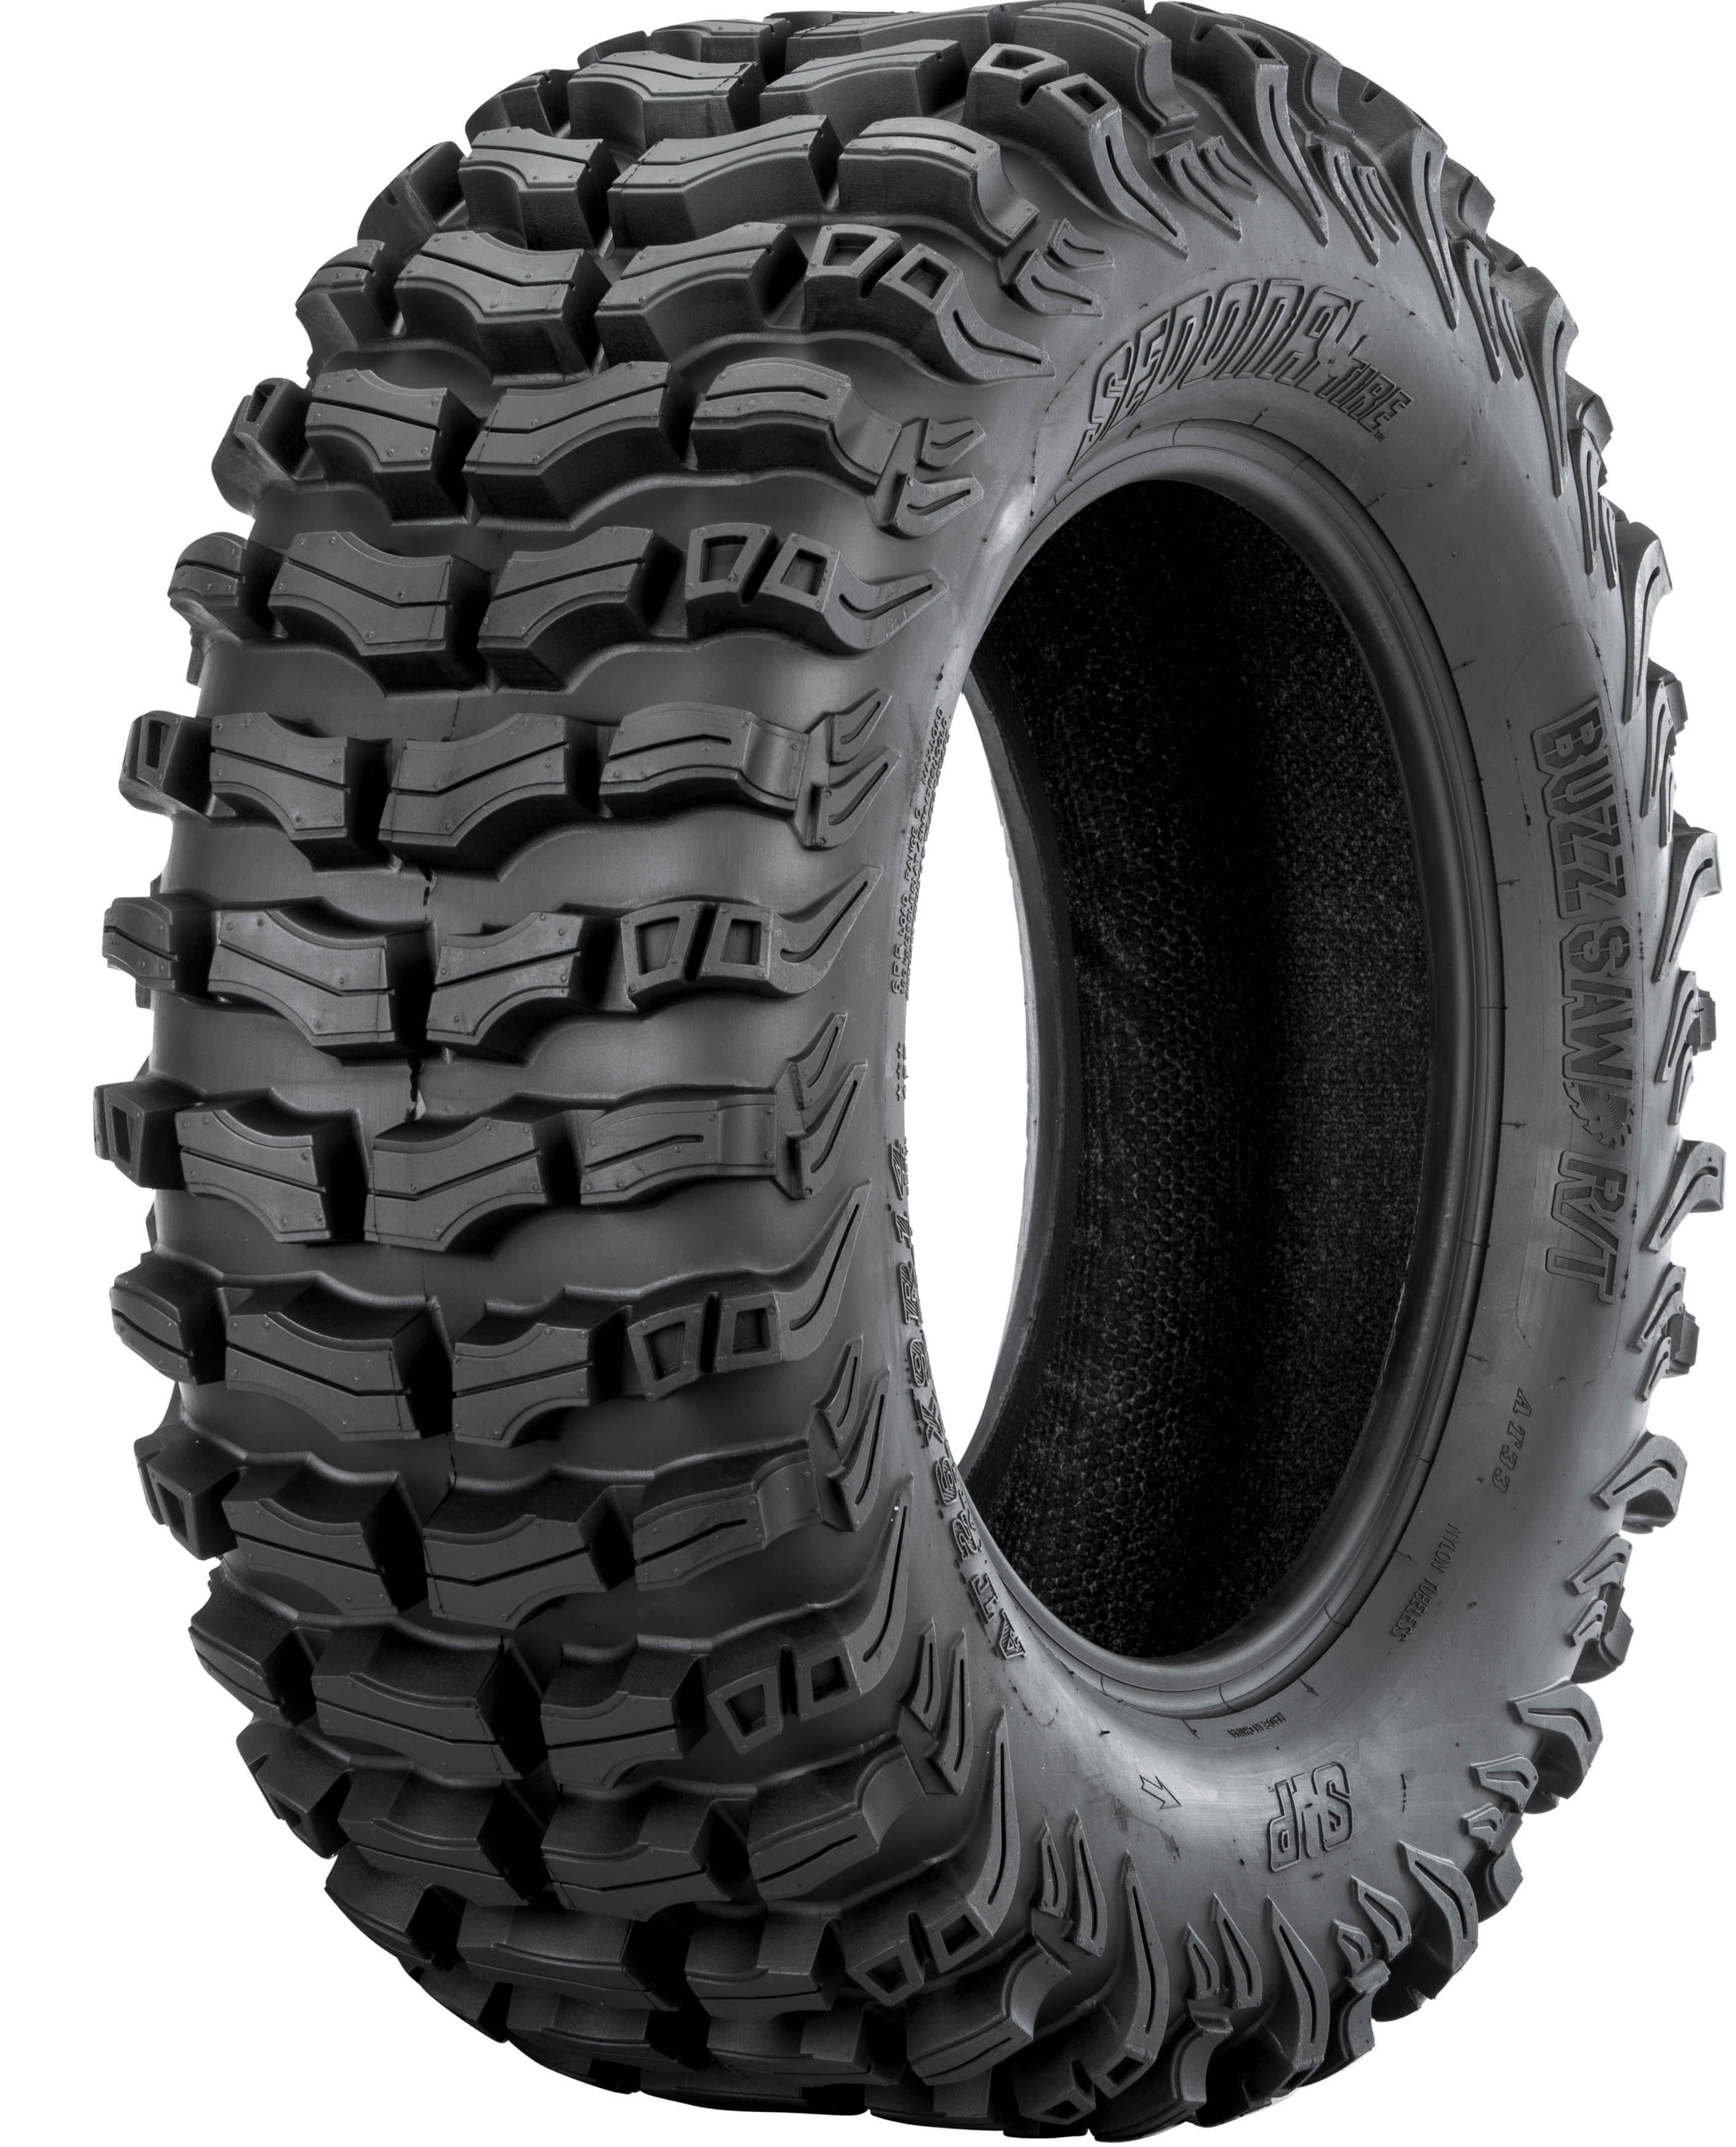 27X9Rx14 Buzz Saw R/T Tire - Click Image to Close